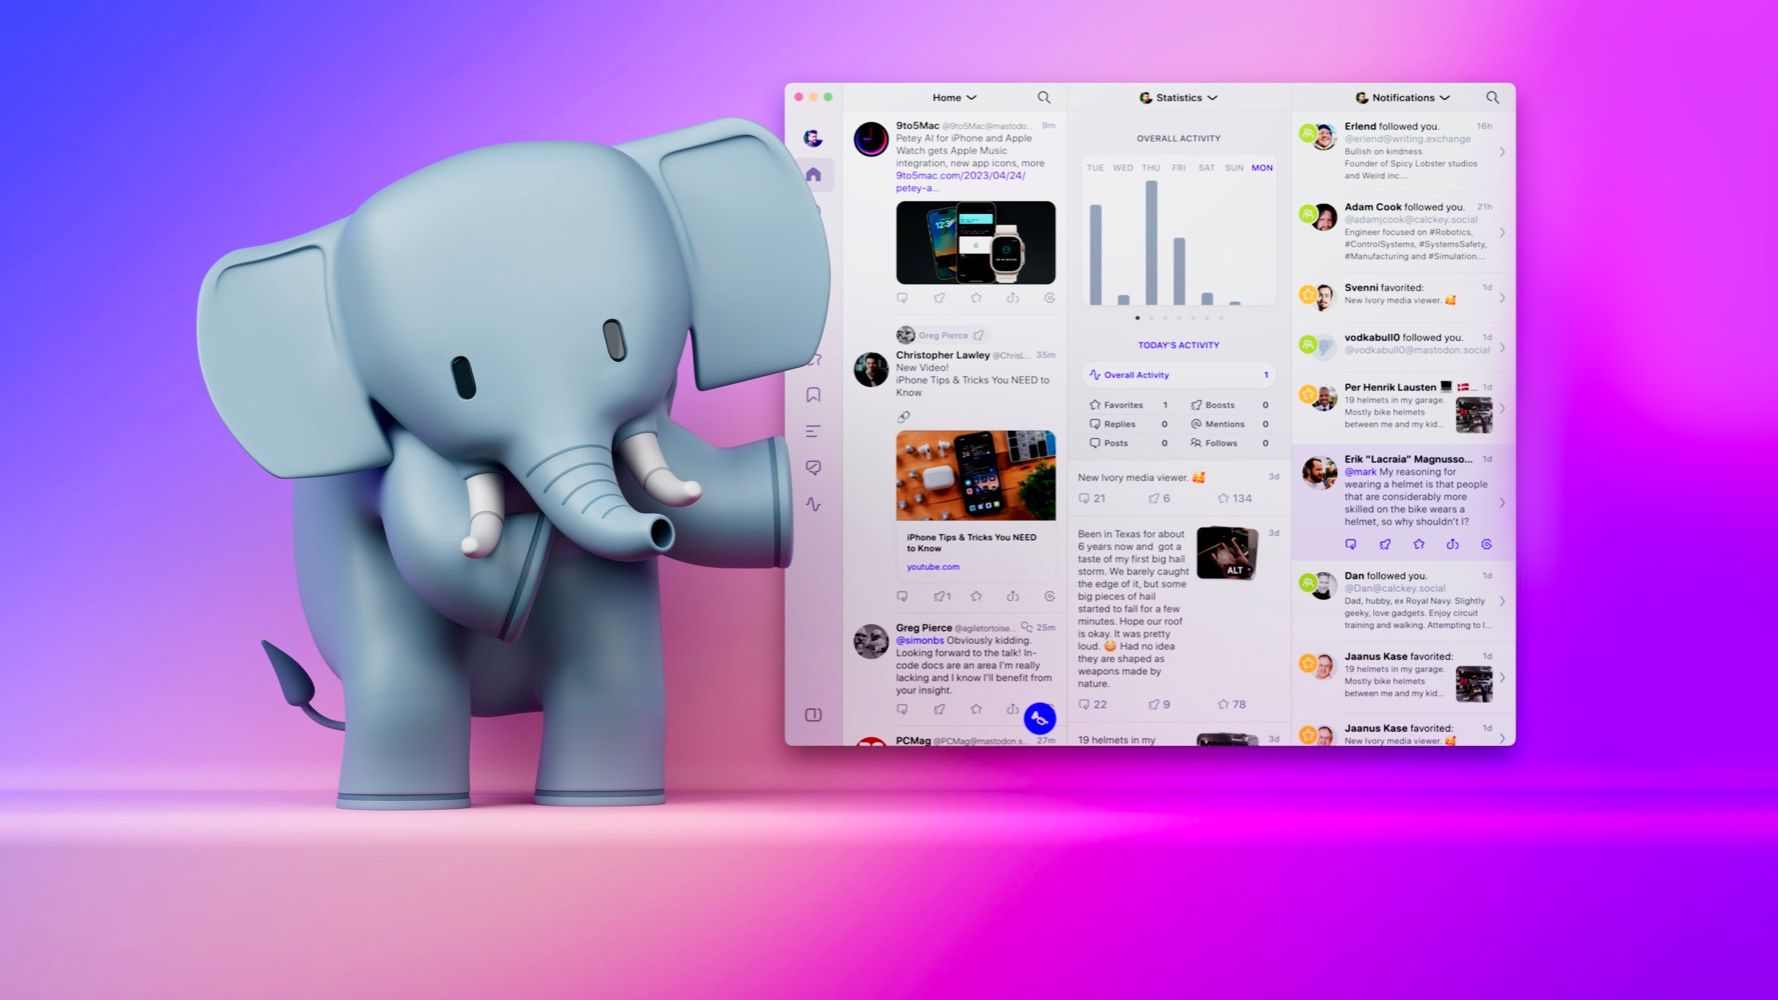 Tweetbot creator Tapbots this week released Ivory for Mac following months of beta testing, bringing its well-designed Mastodon app to the desktop. Ma